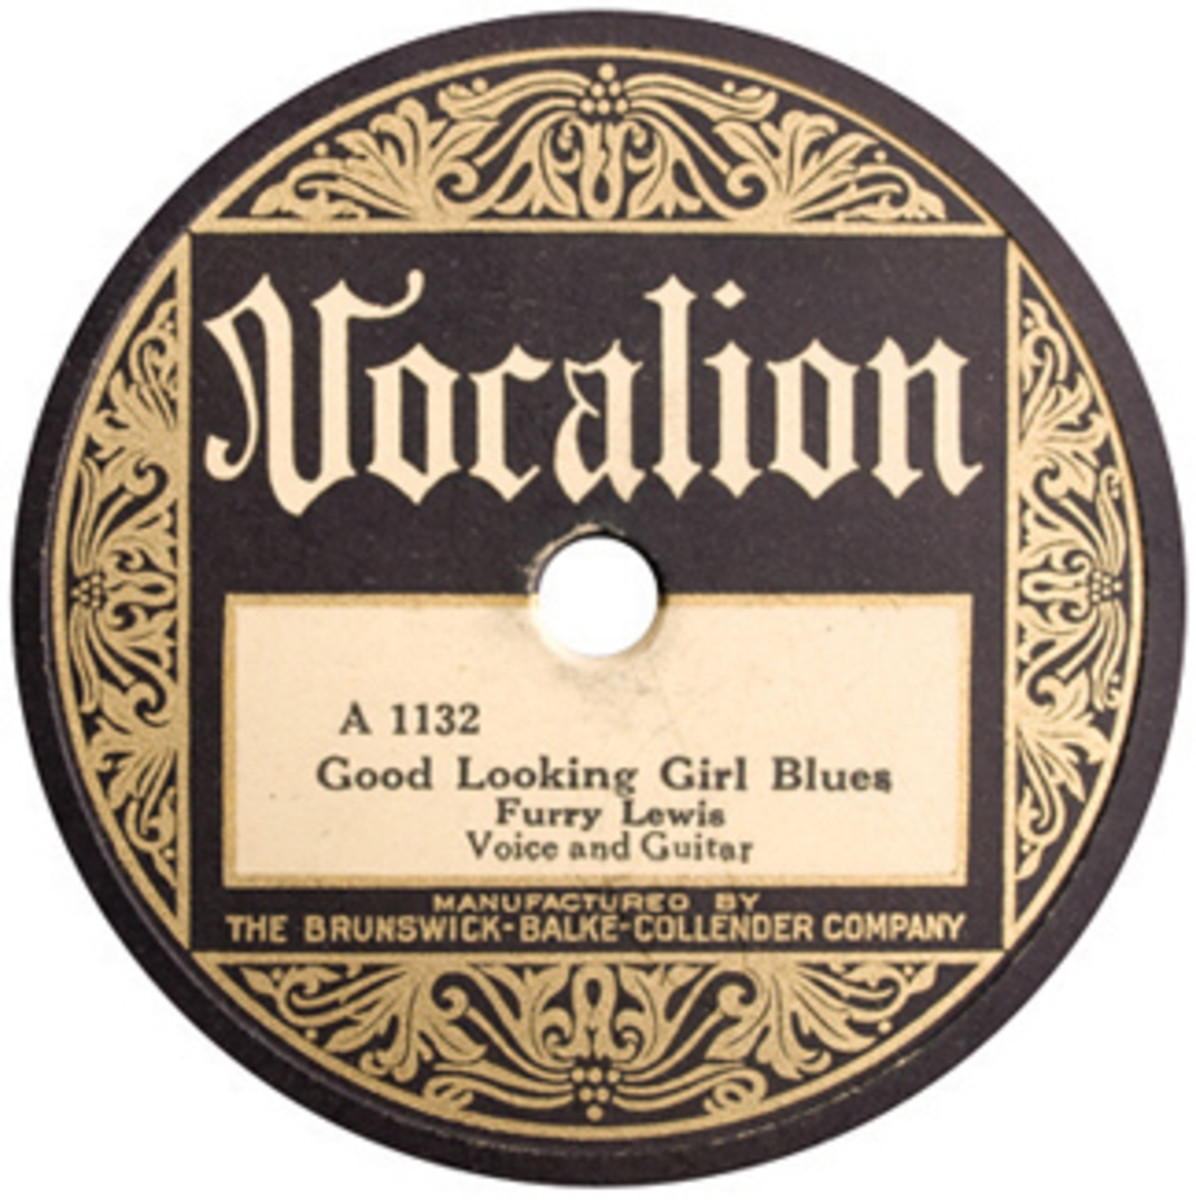 Furry Lewis Good Lookin Girl Blues Vocalion A 1132